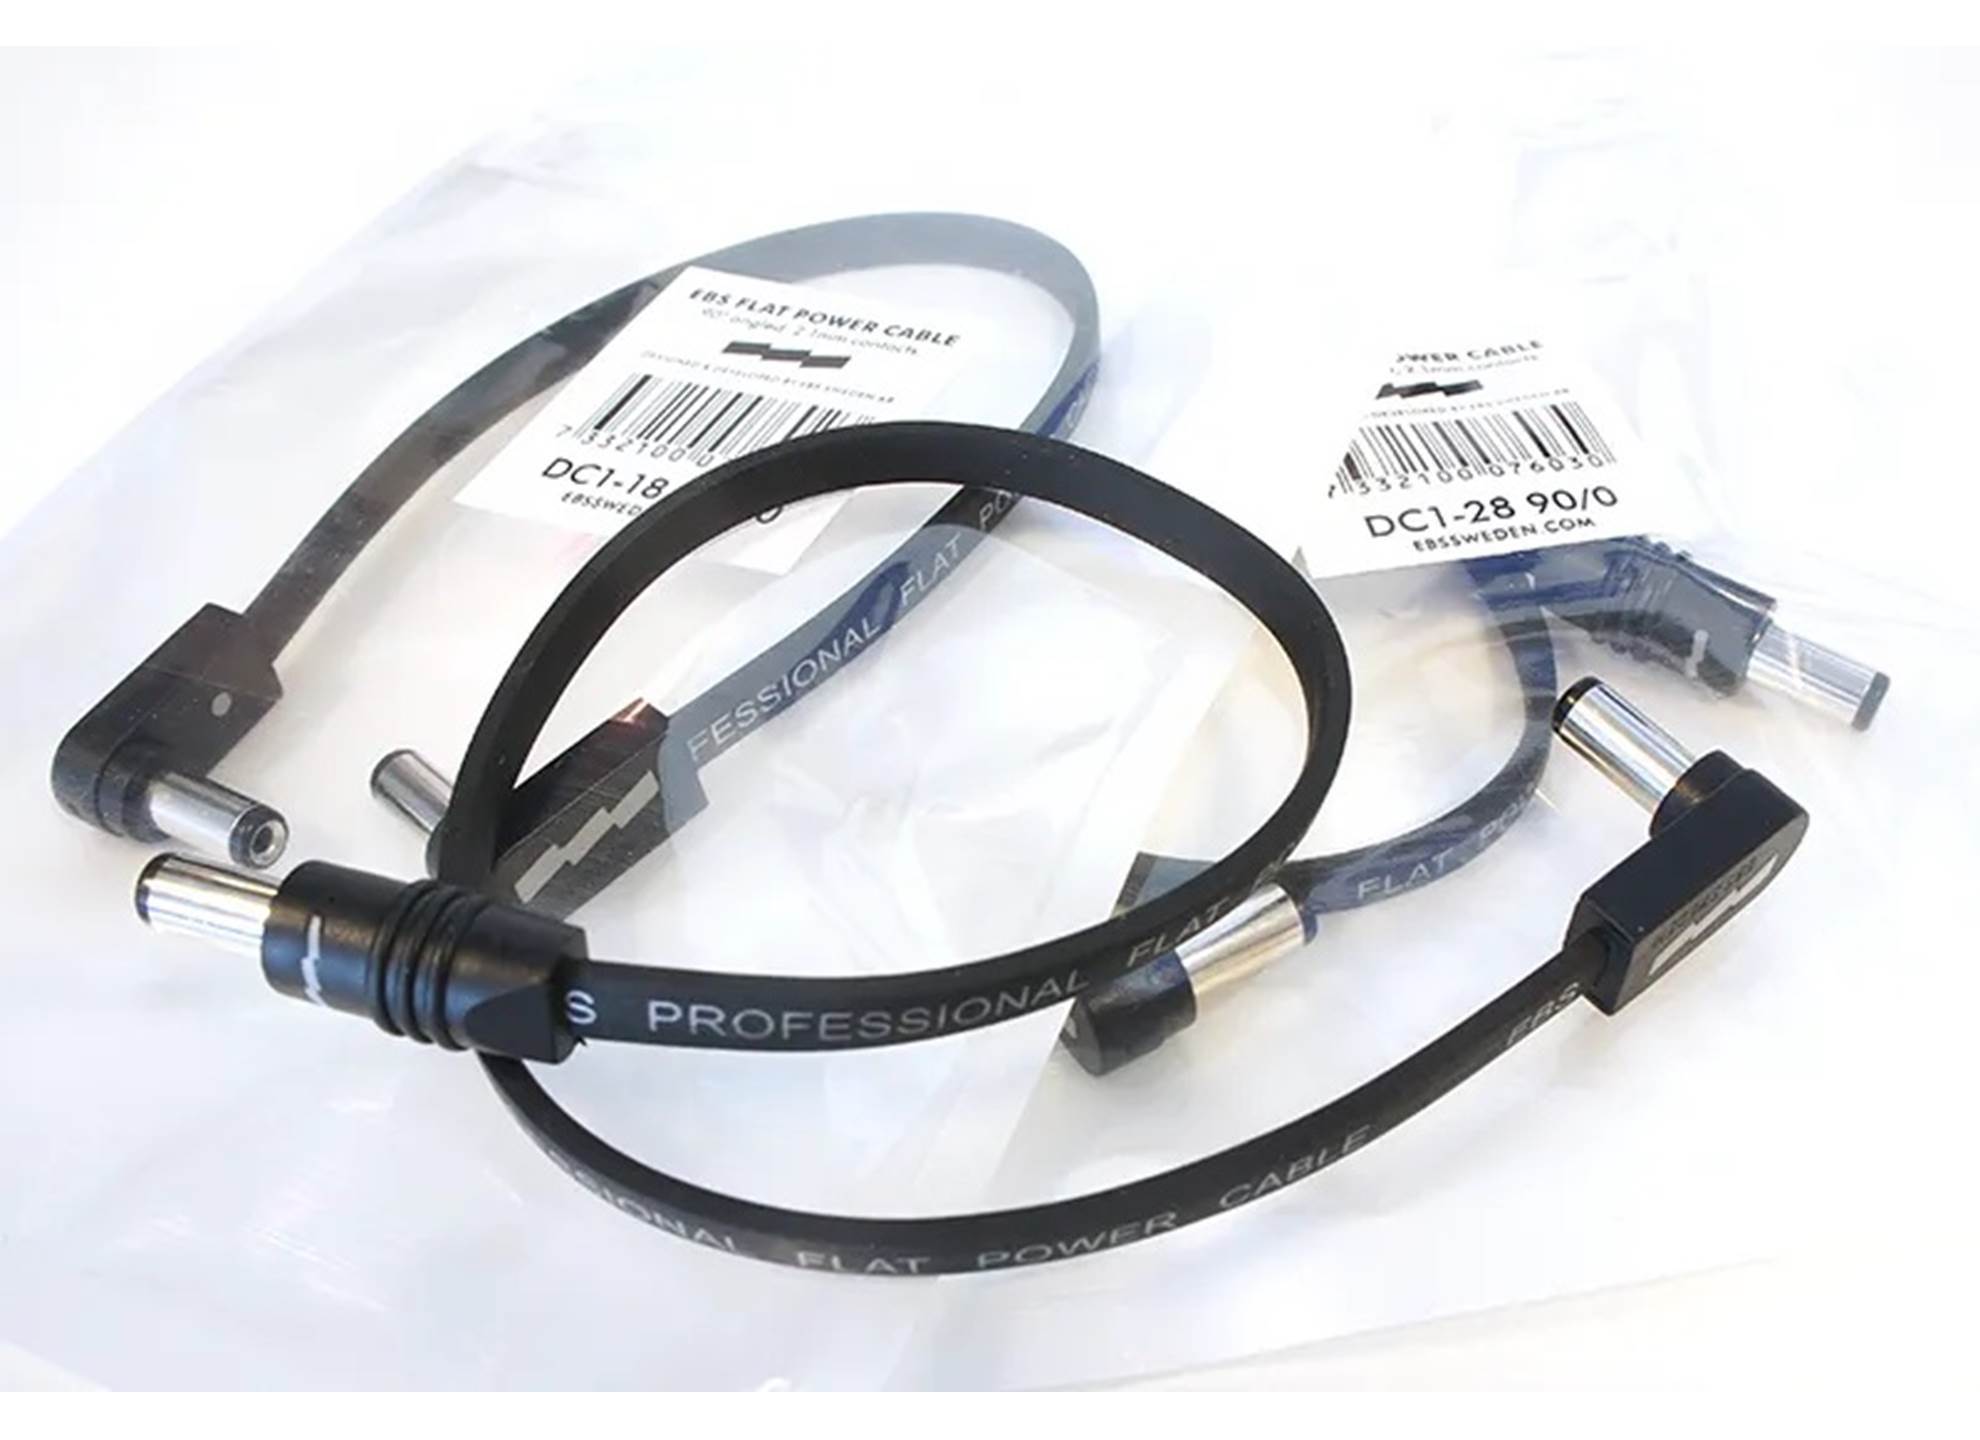 DC1-28 90/0 Flat Power Cable 28 cm